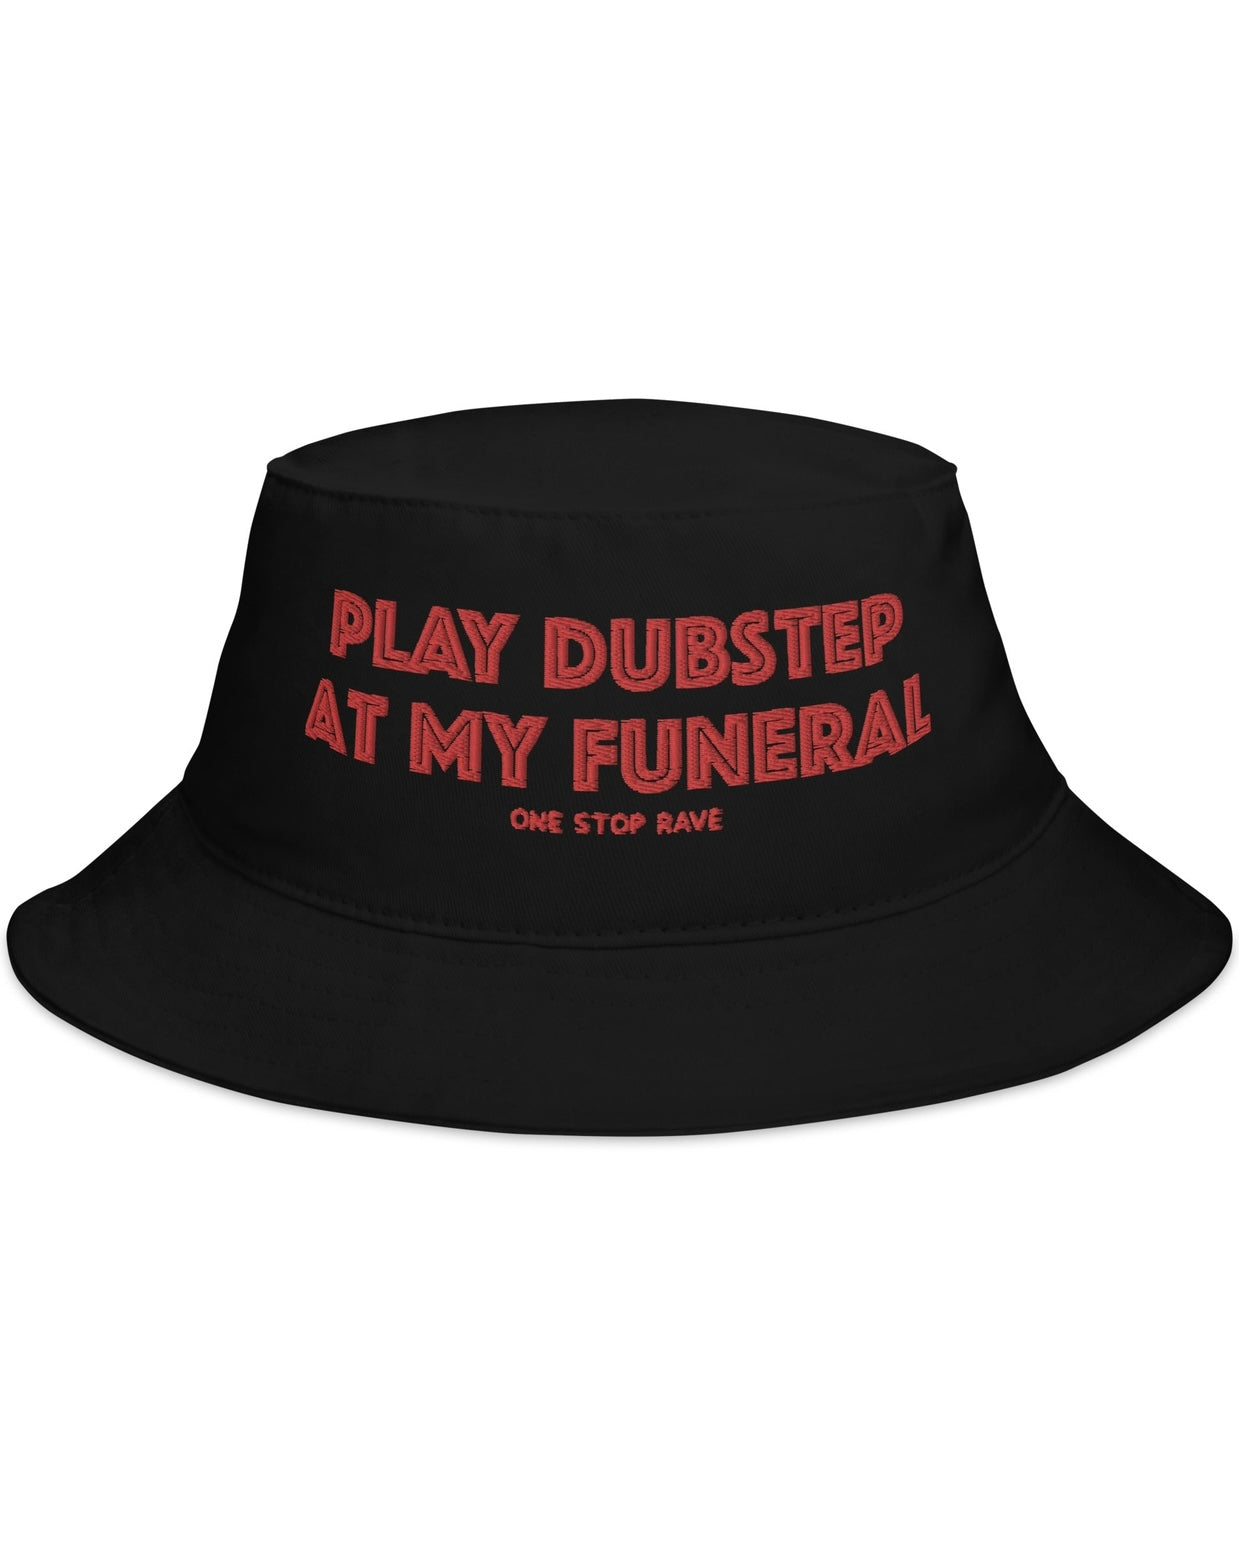 Play Dubstep At My Funeral Bucket Hat, Bucket Hat, - One Stop Rave